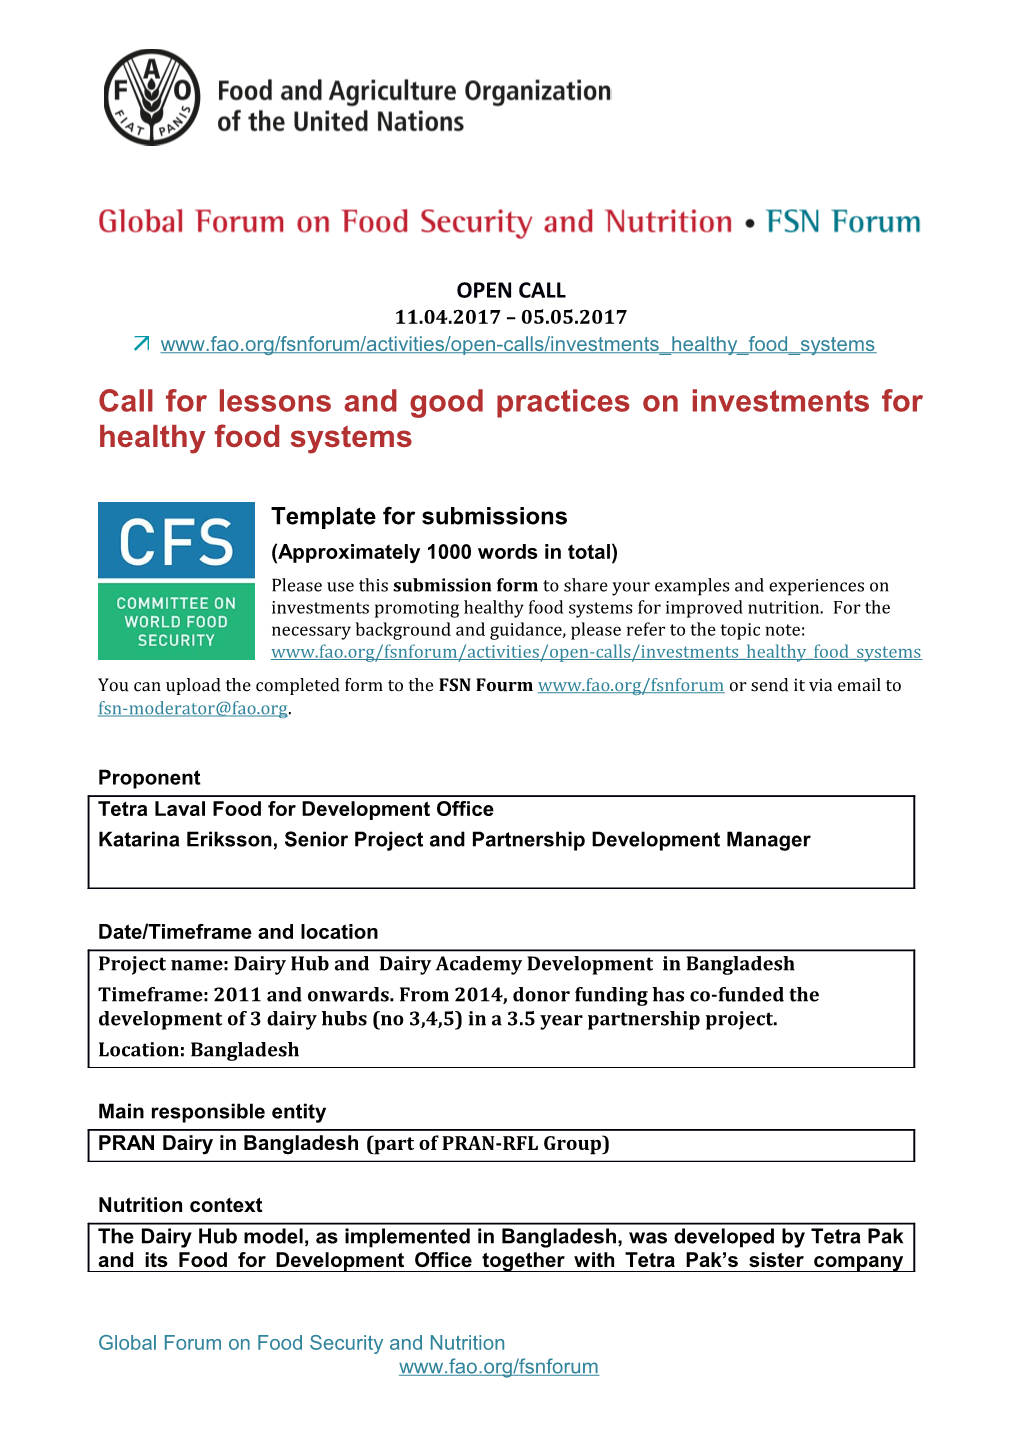 Call for Lessons and Good Practices on Investments for Healthy Food Systems